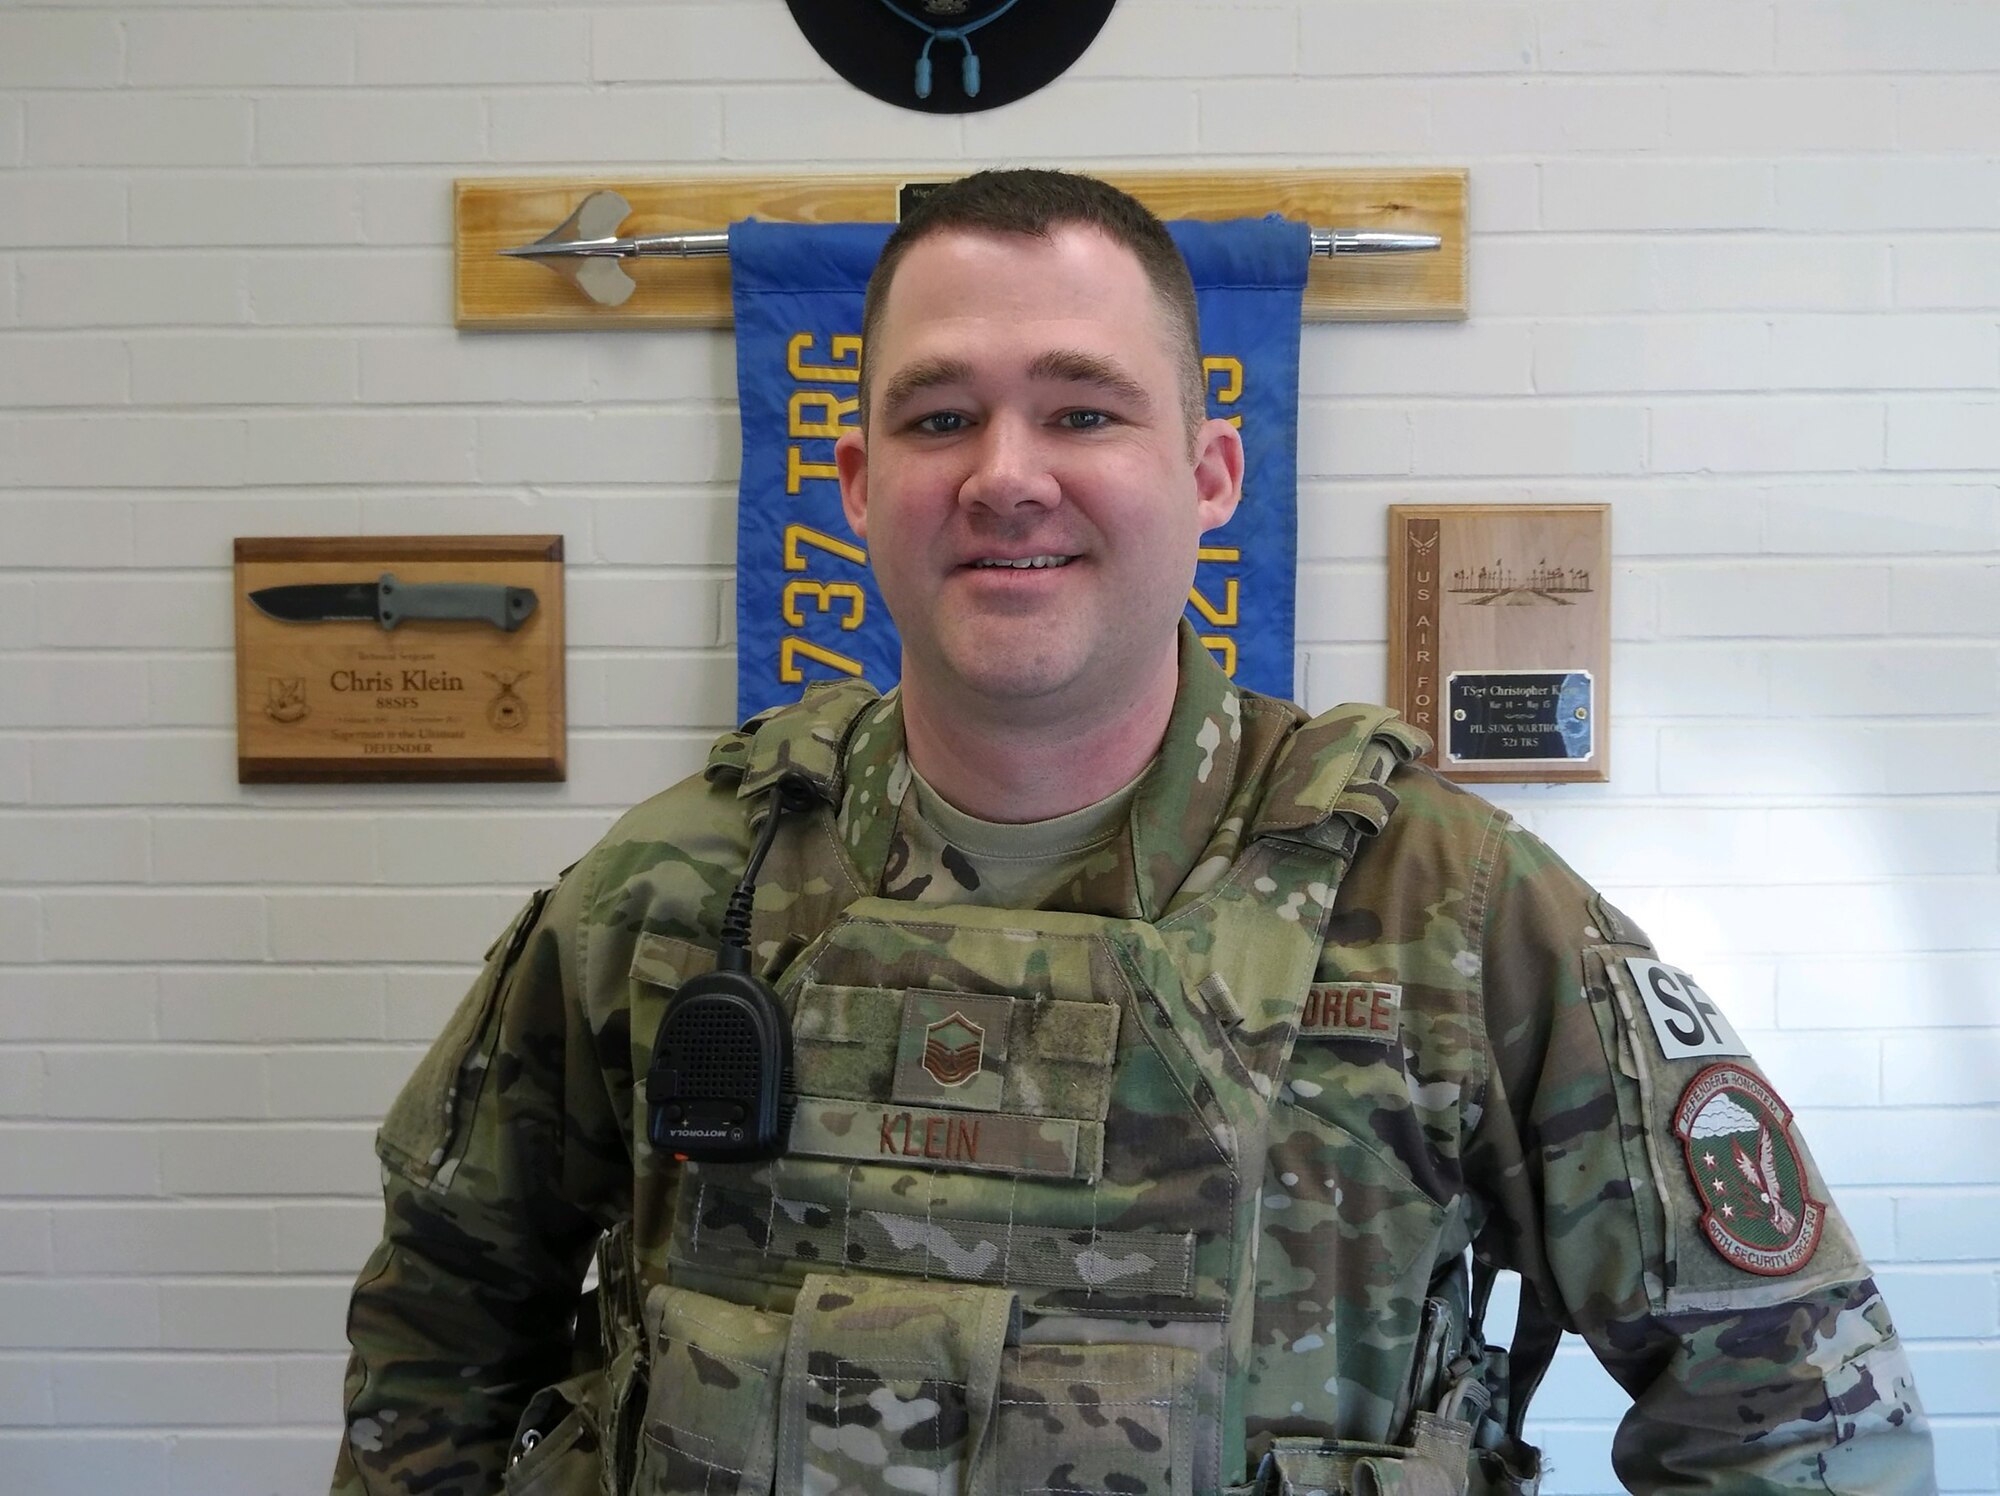 Master Sgt. Christopher Klein, 90th Security Forces Squadron, poses for a photo Dec. 18, 2019, on F.E. Warren AFB, Wyo. Air Force Global Strike Command awarded Klein the 2018 Outstanding Security Forces Flight Level Senior NCO Award for his efforts as the flight sergeant during a major command inspection, helping plan and execute active shooter response training with the U.S. Marshall Service and standing up a Profession of Arms Center of Excellence course within the 90th Security Forces Group while filling in as the acting first sergeant and earning his bachelor's degree in Psychology.